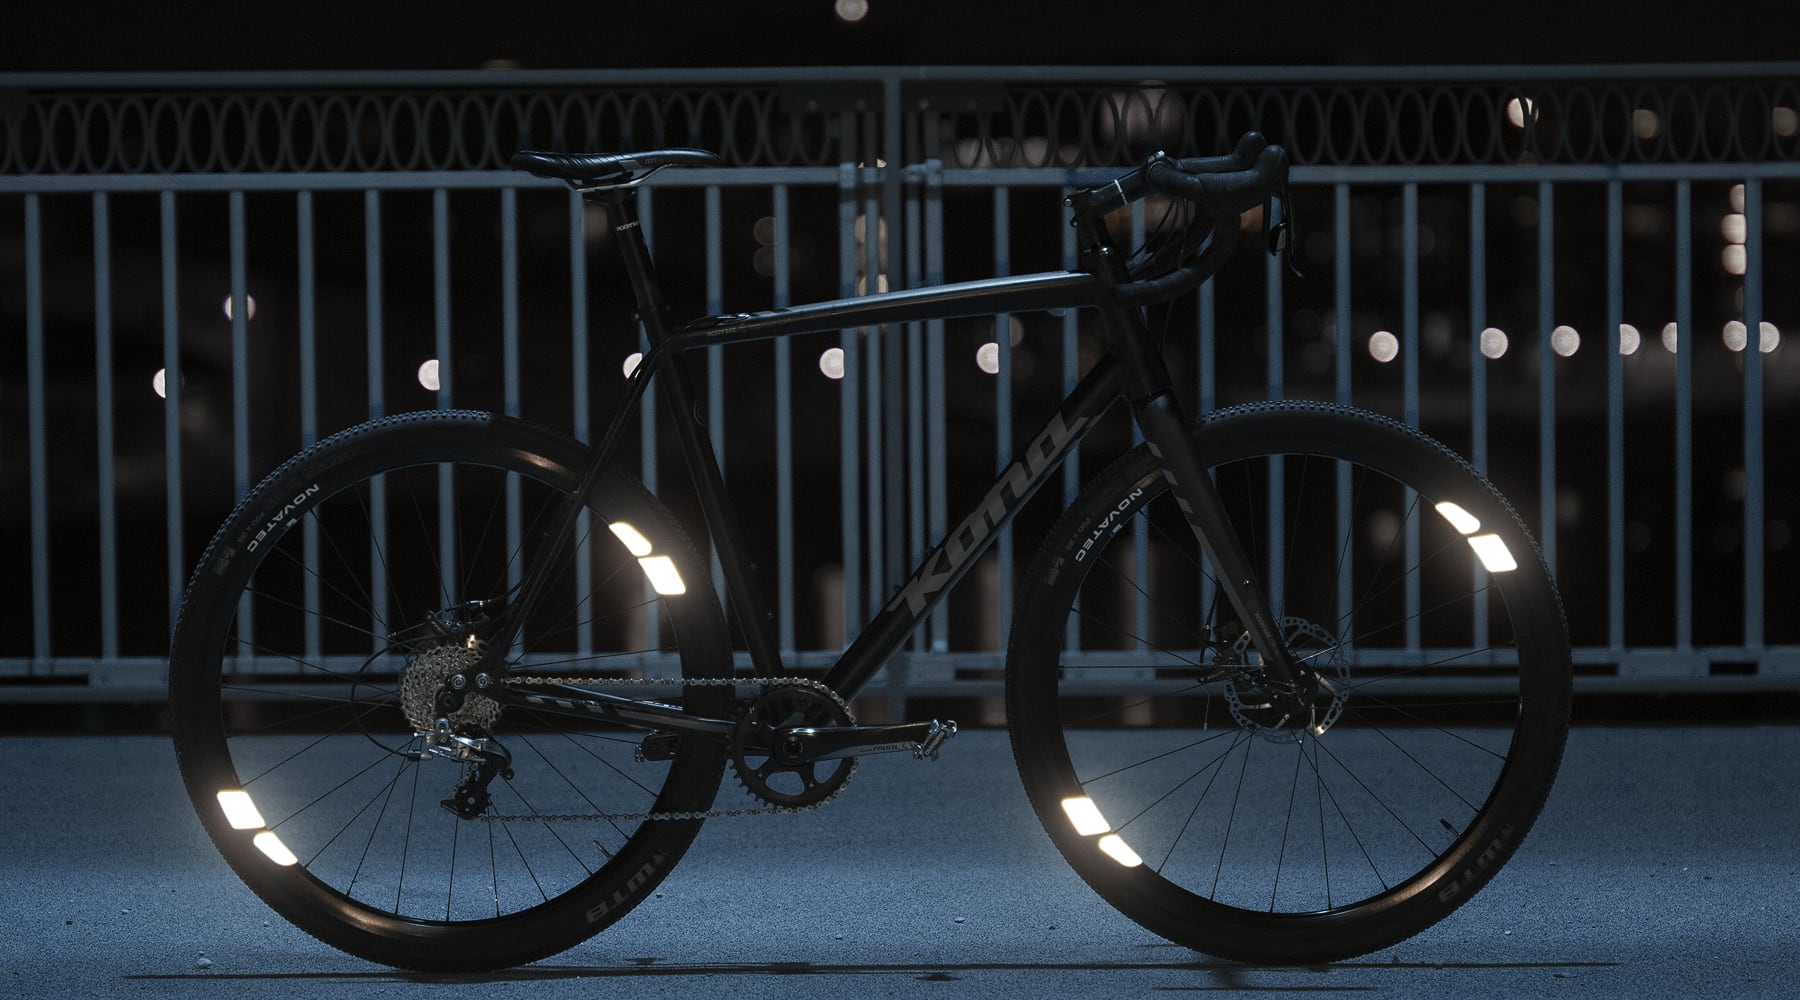 Flectr 360 bicycle reflectors - a reflective bike with high visibility and style